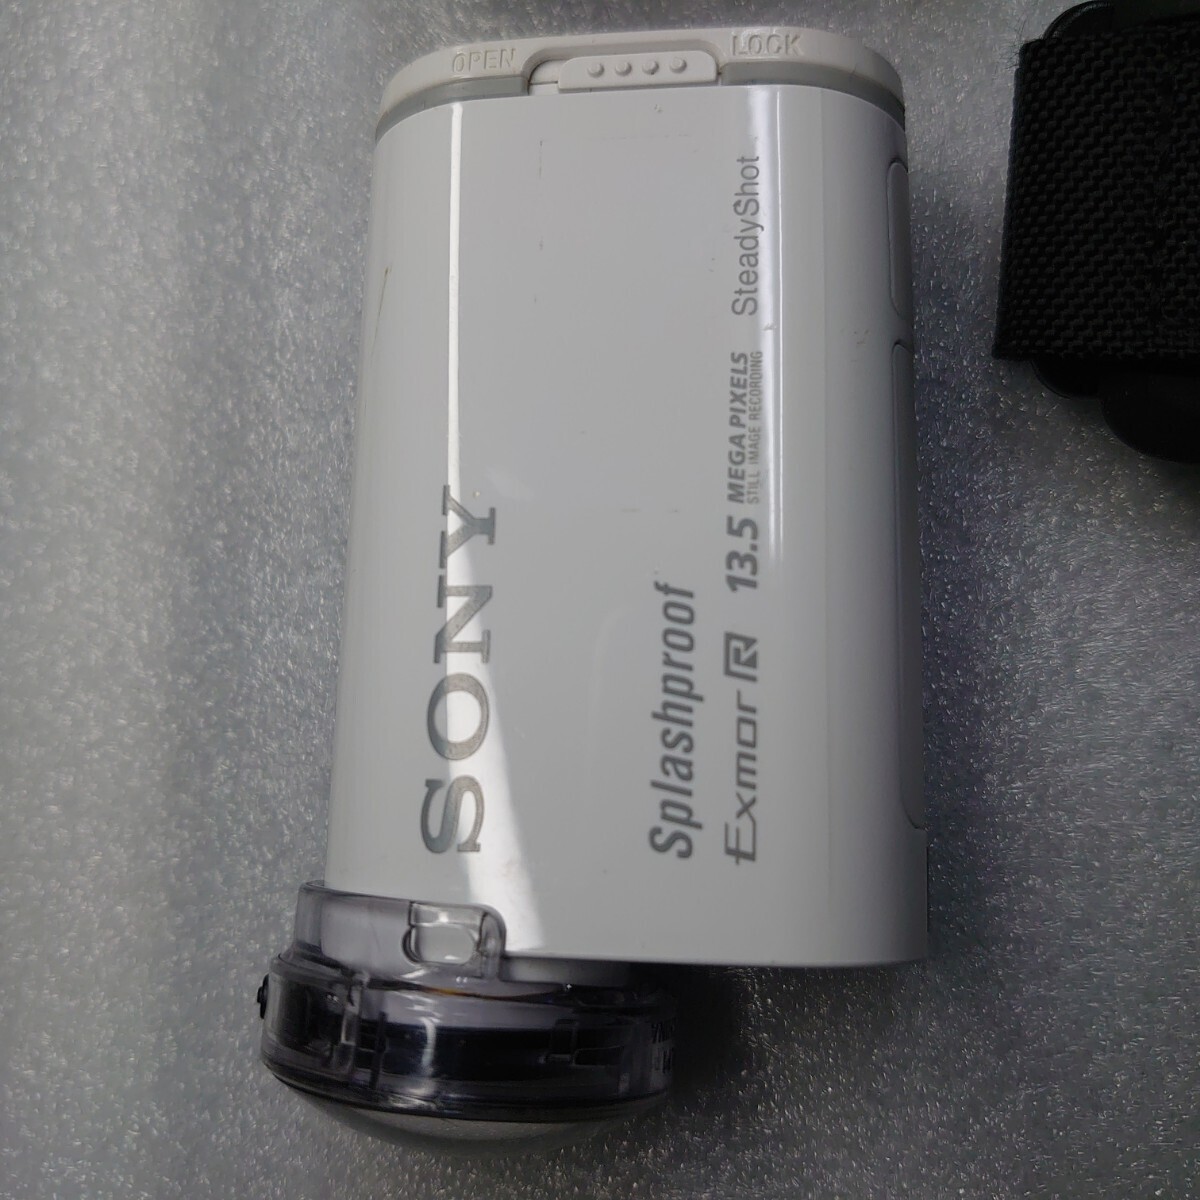  Sony action cam HDR-AS100V remote control attaching 